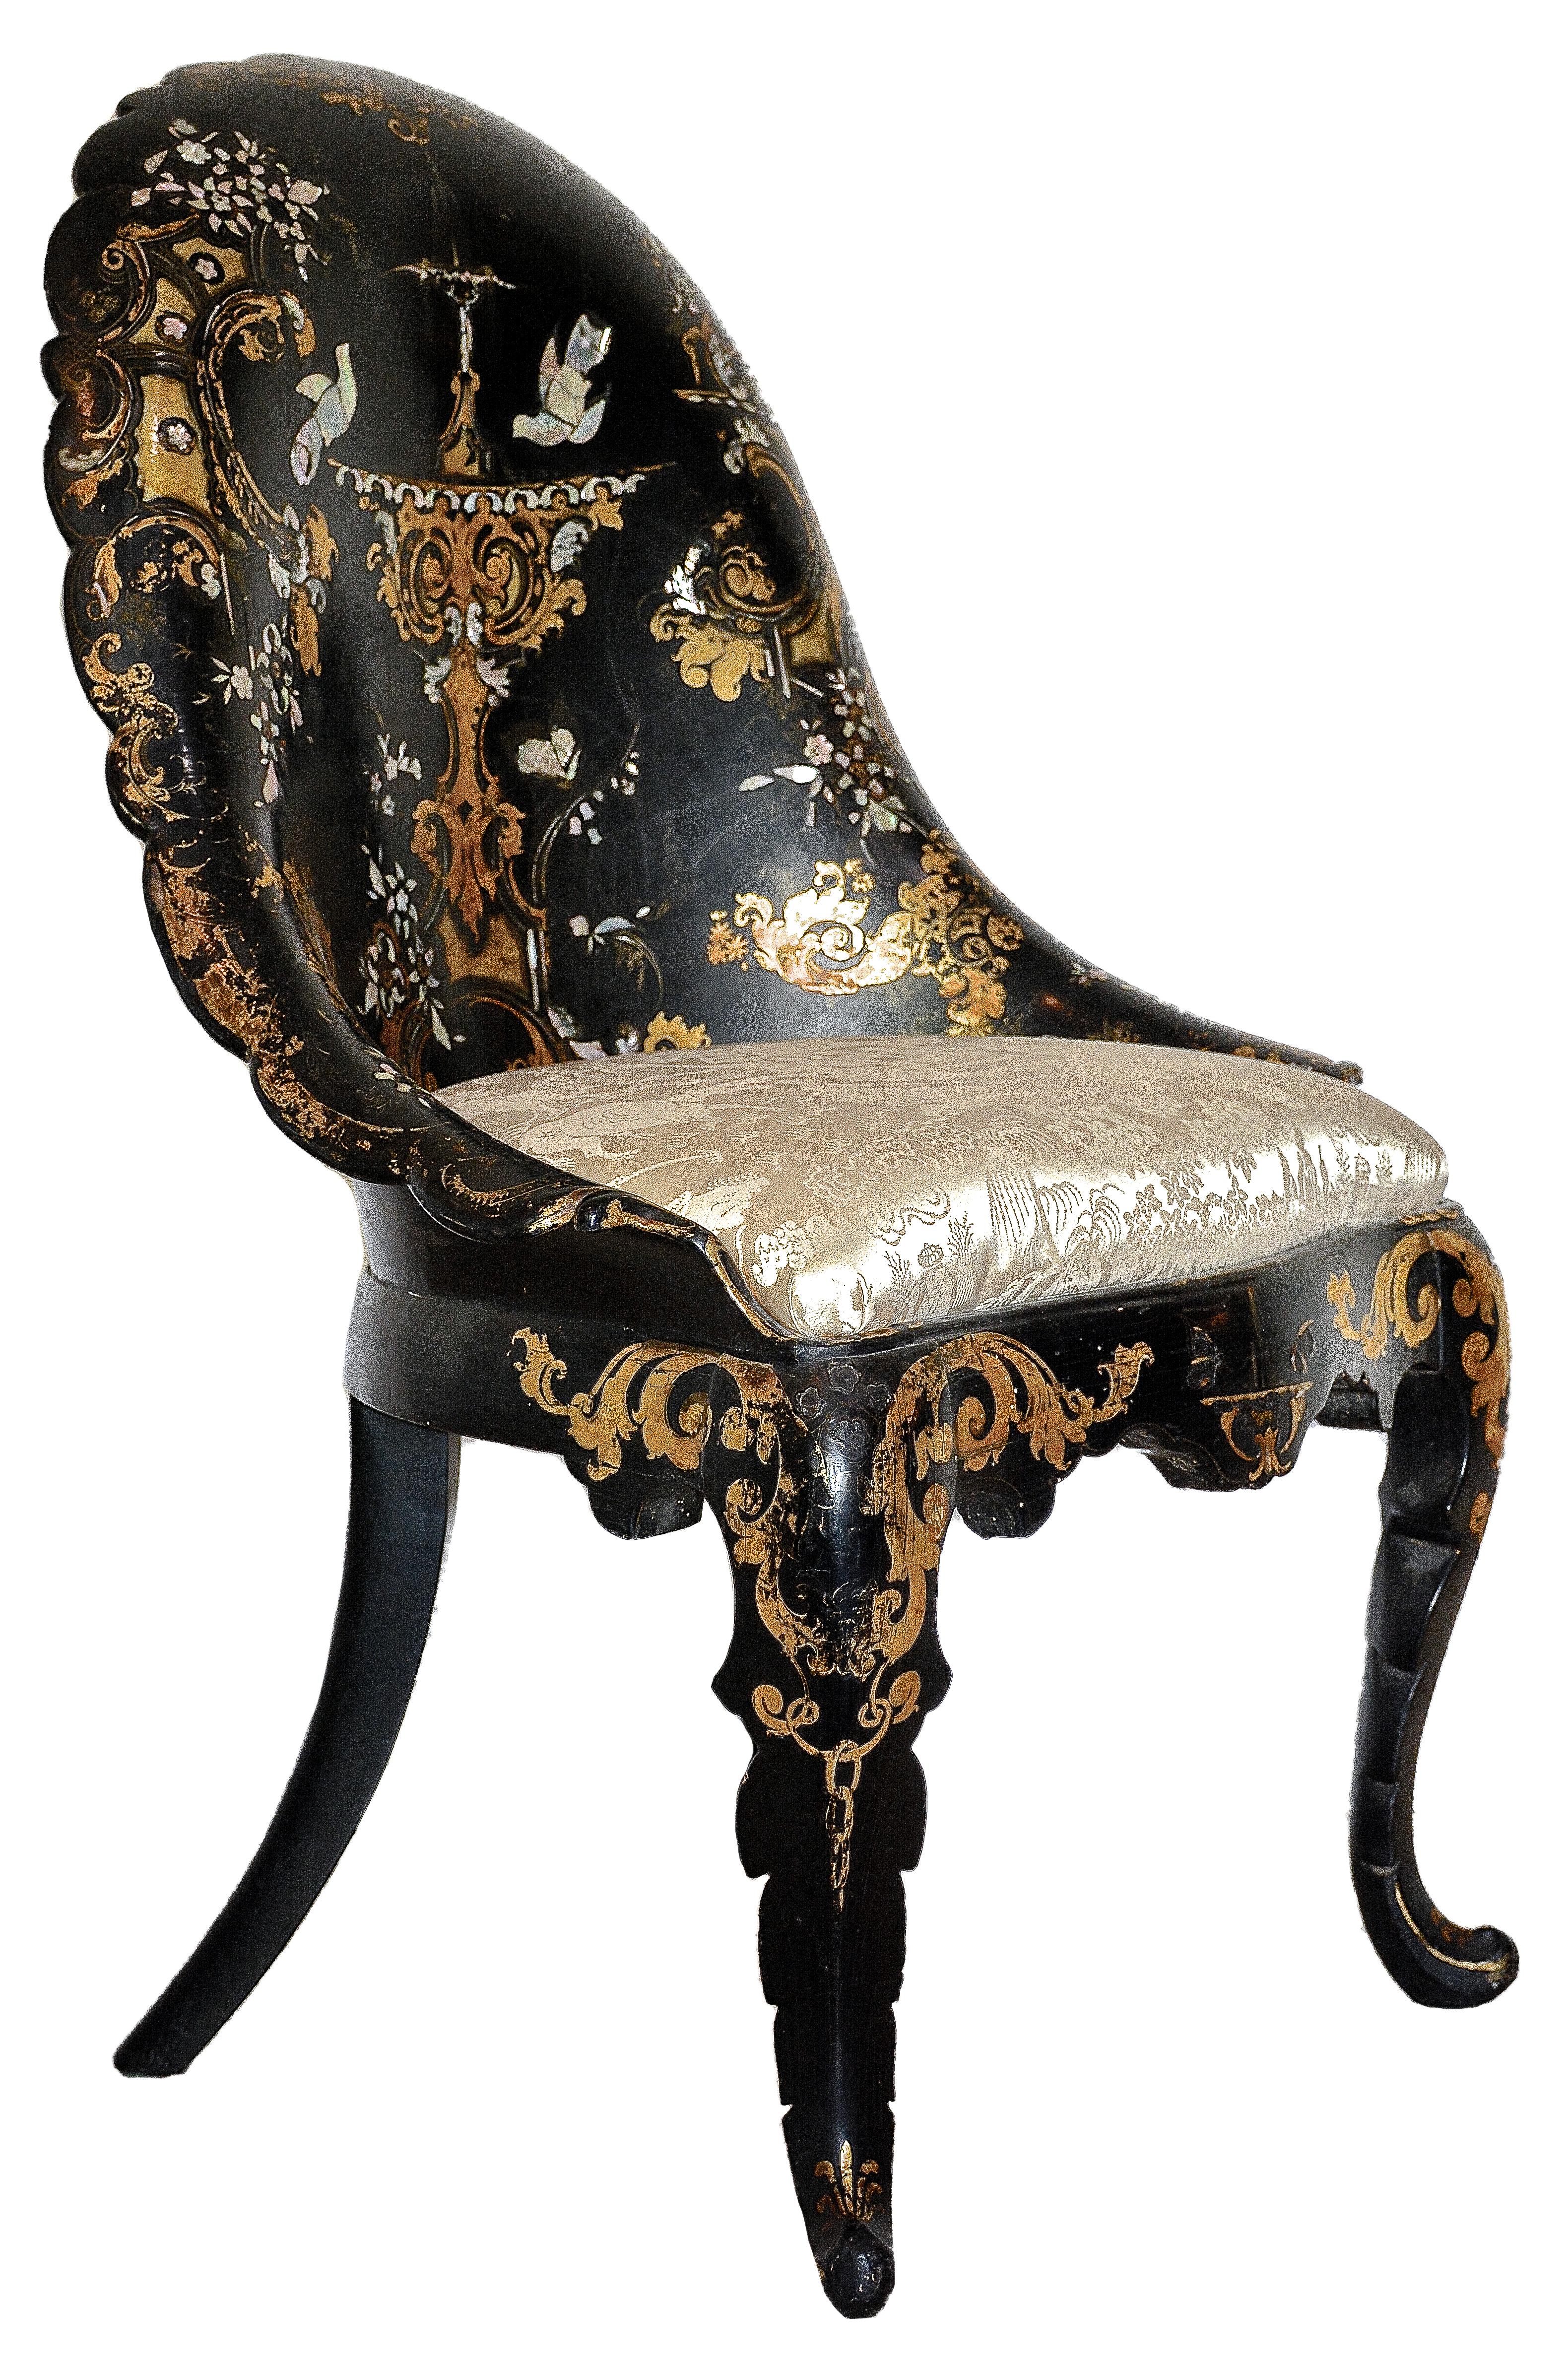 English 19th Century Victorian Inlaid Mother-of-Pearl & Gilt Papier Mache Chair For Sale